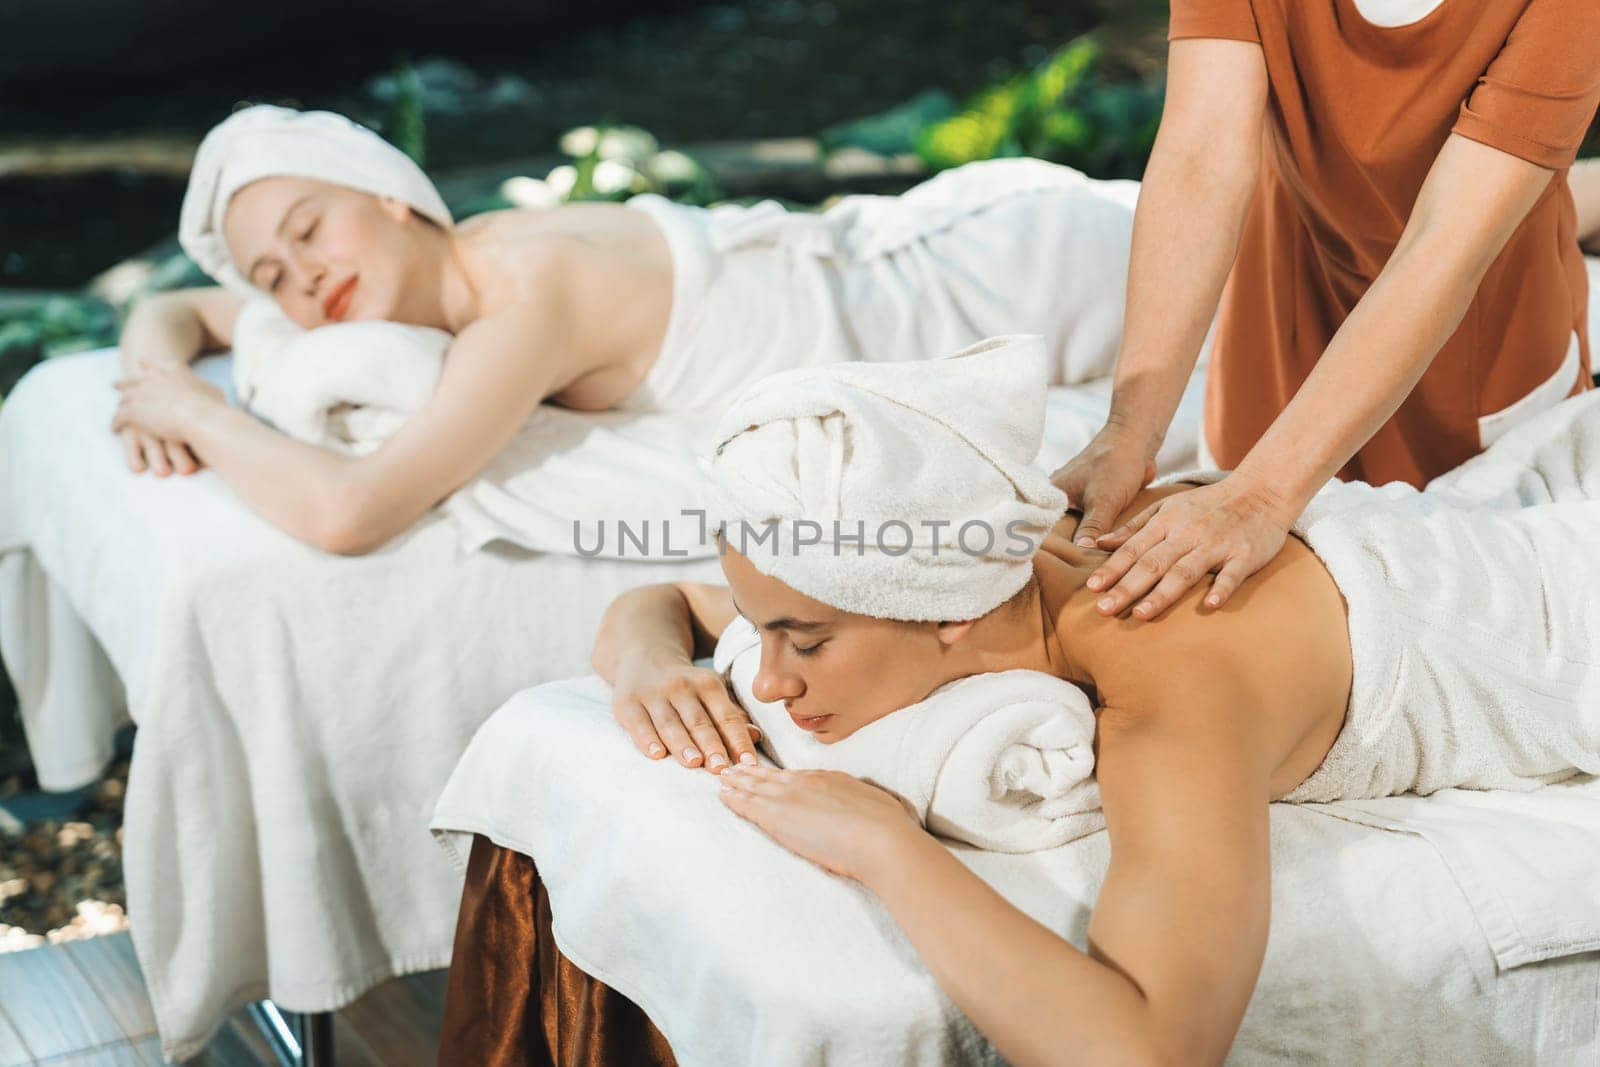 A portrait of two young attractive woman lie on bed during having back massage by a professional masseur at outdoor surrounded by peaceful natural environment. Healthy and beauty concept. Tranquility.